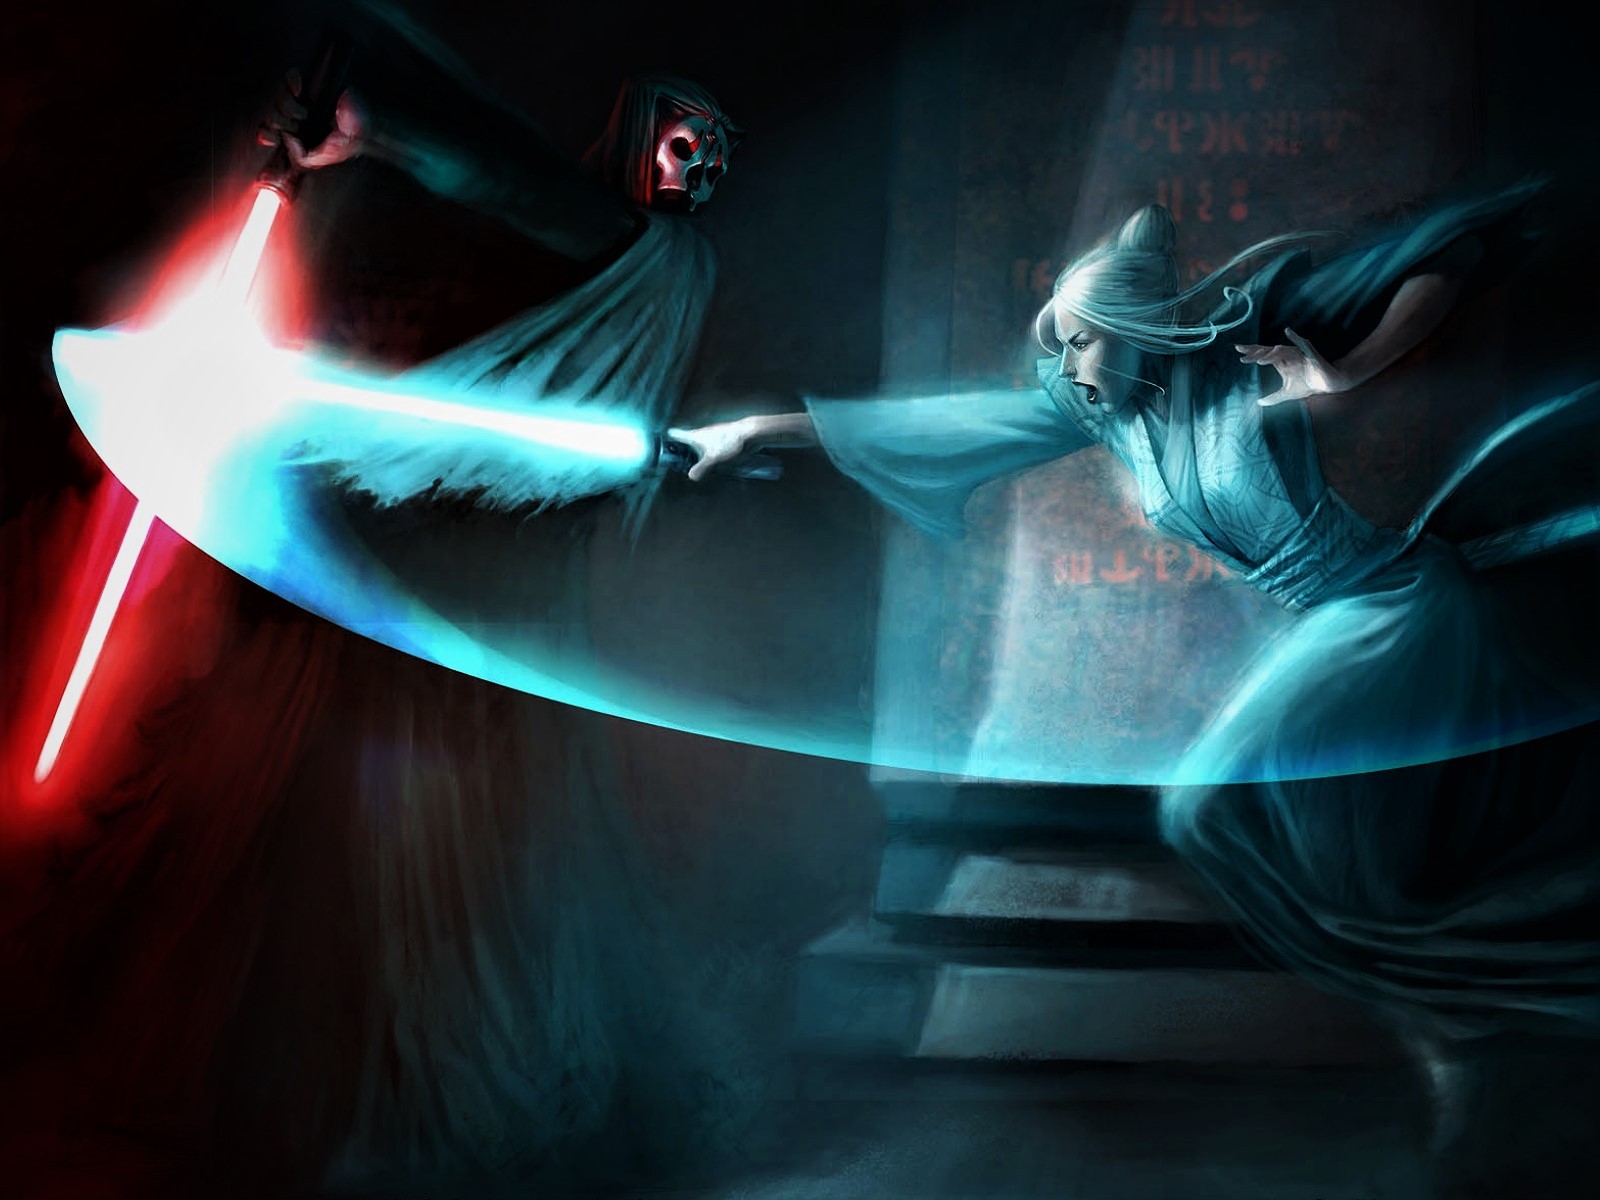 General 1600x1200 Star Wars Jedi Sith Darth Nihilus video games Star Wars Villains cyan video game art science fiction women science fiction lightsaber video game girls Star Wars: Knights of the Old Republic II: The Sith Lords Brianna